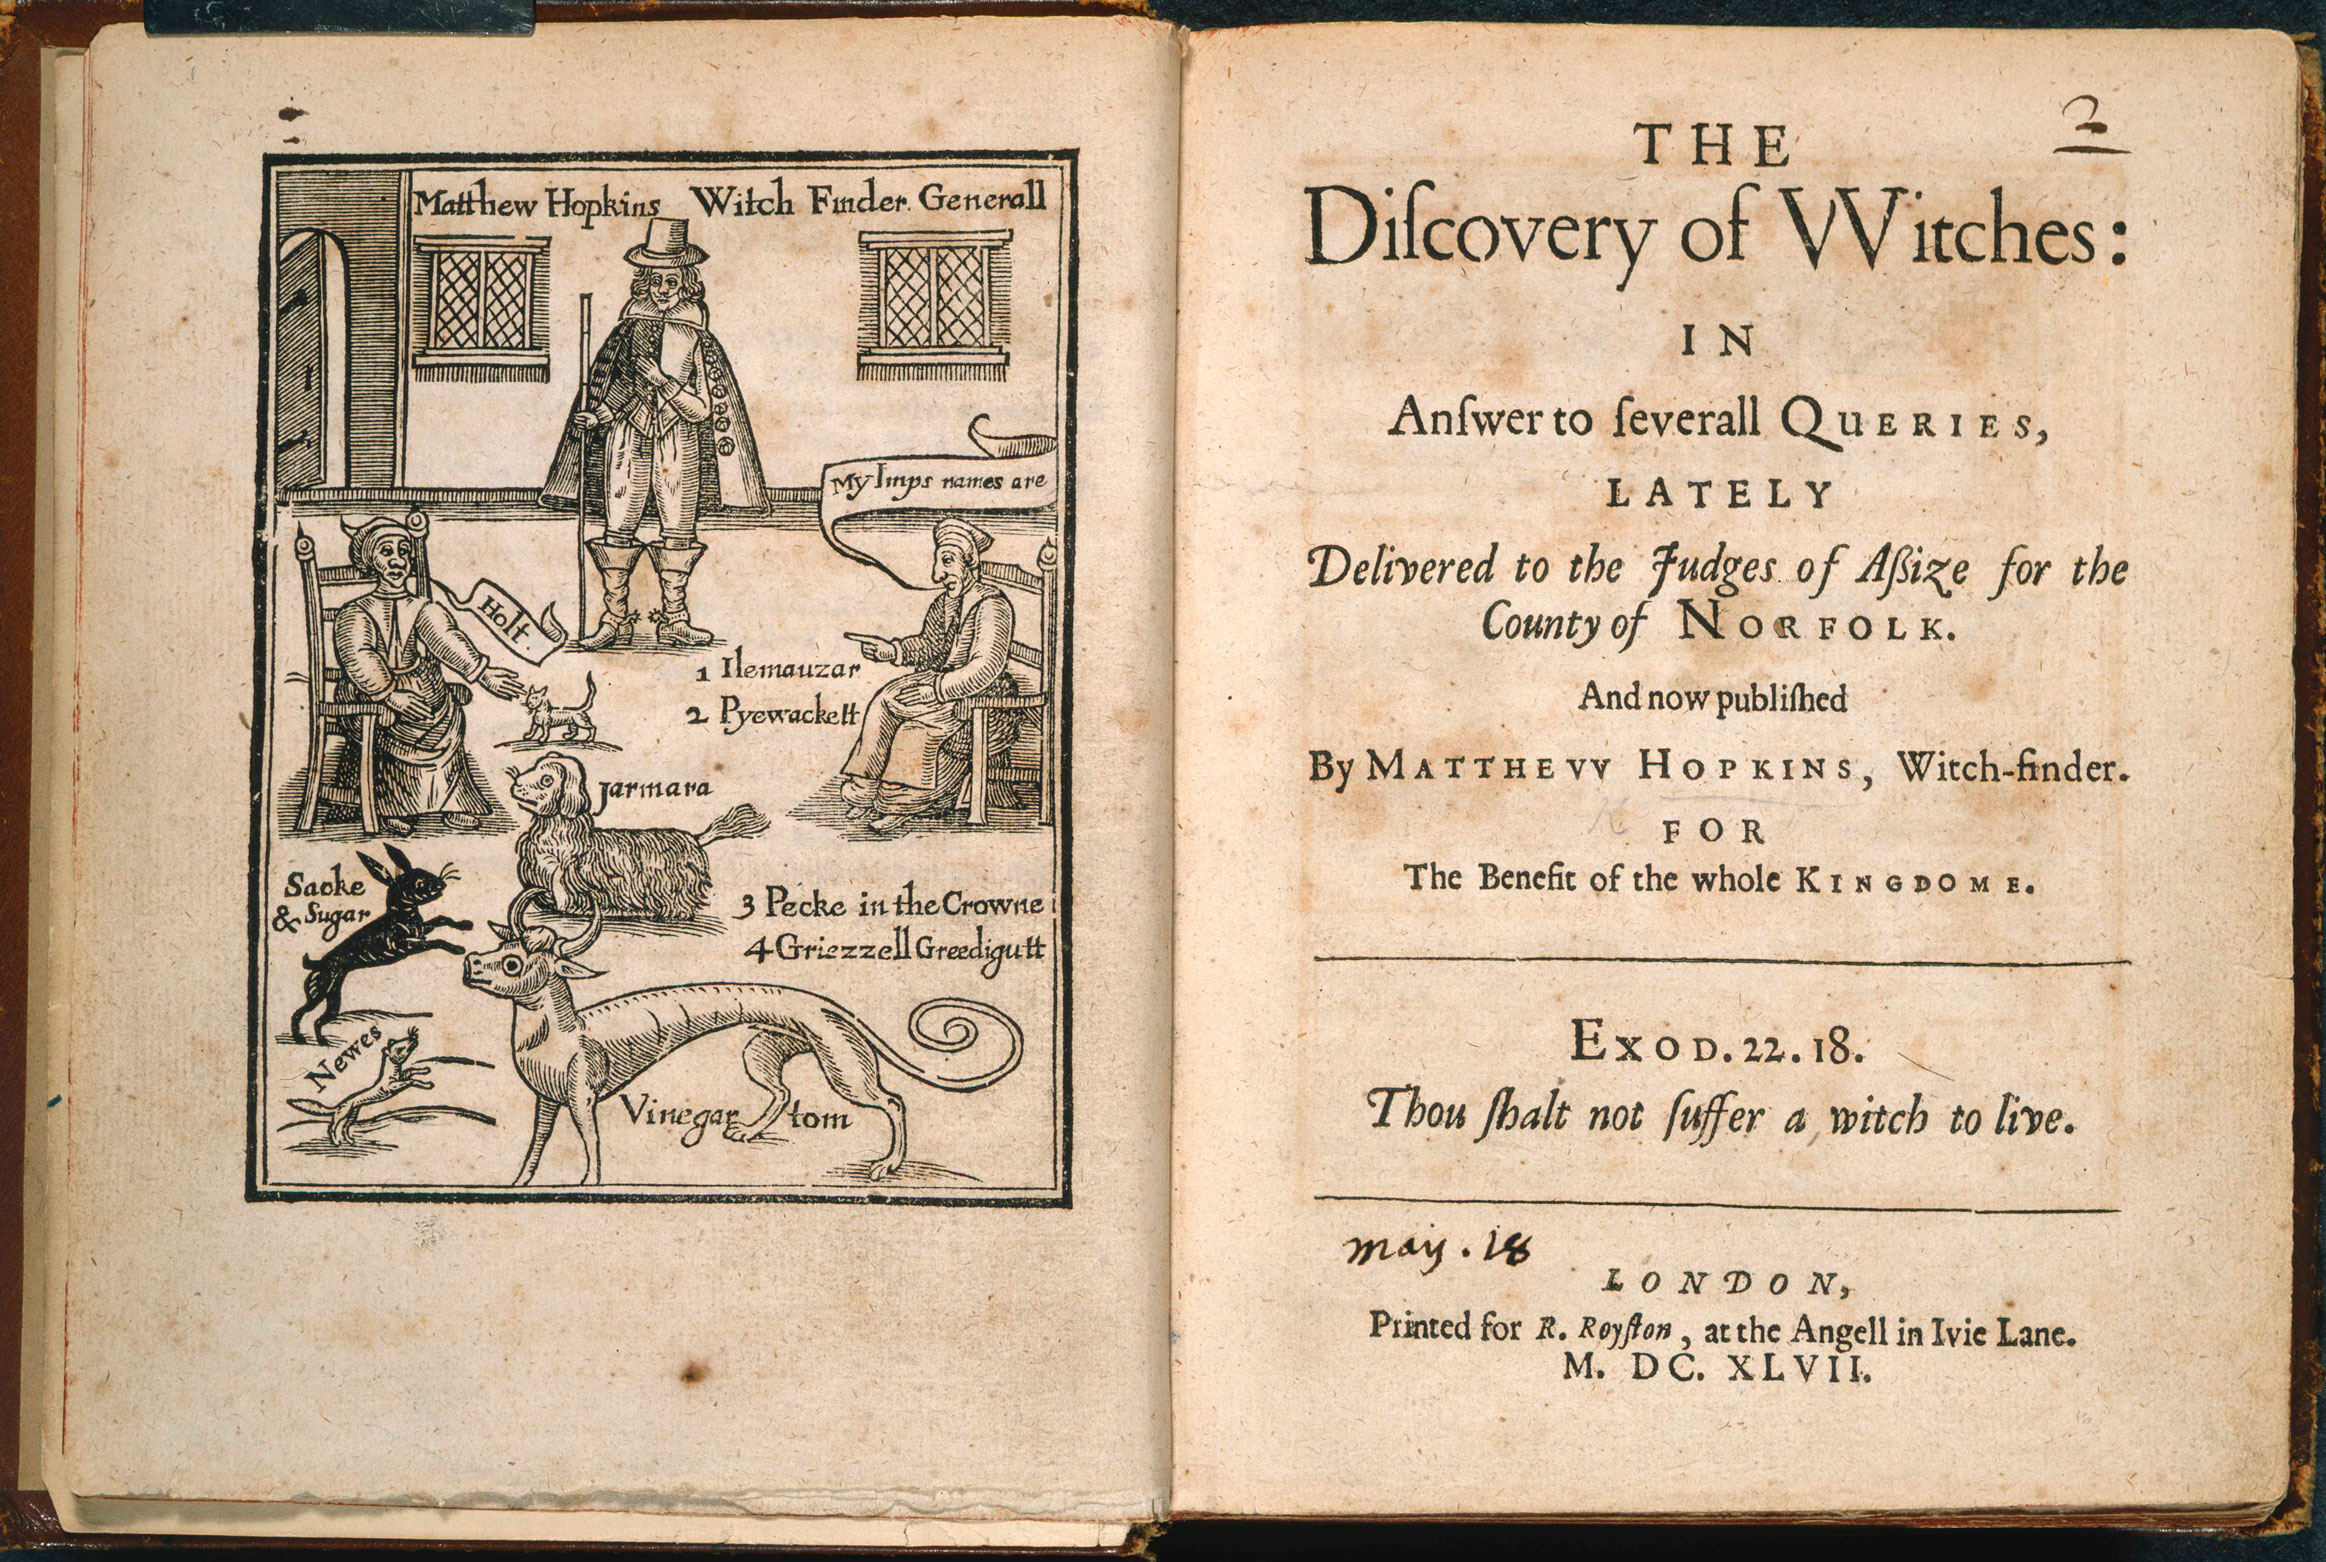 The Discovery of Witches Catalogue ref: E.388.(2) © The British Library Board